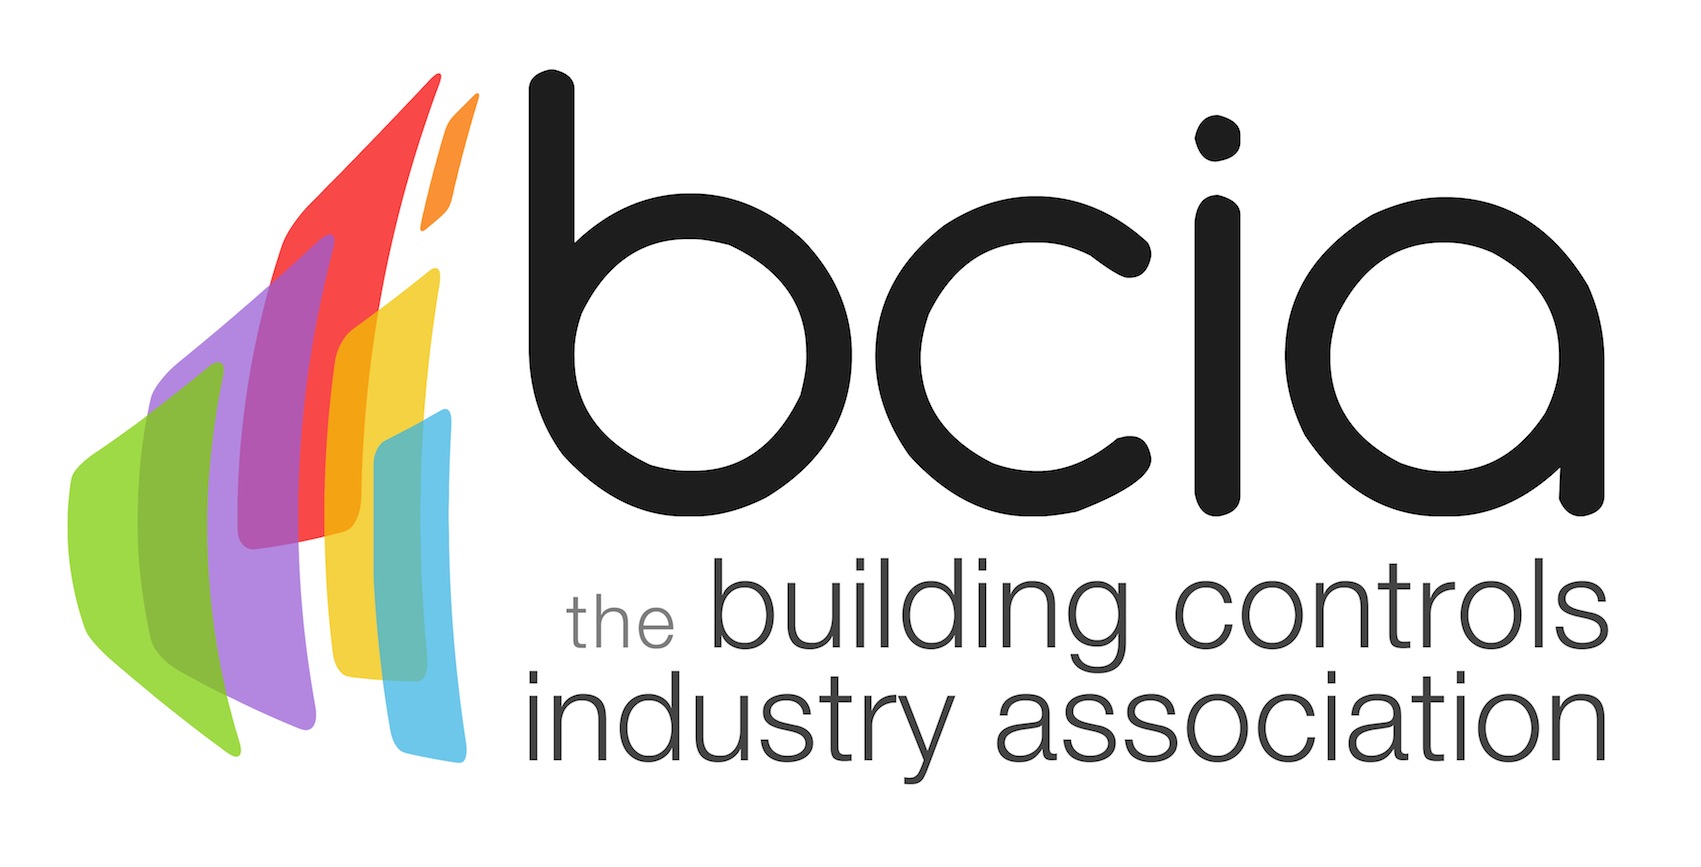 Entries are now open for the 2018 BCIA Awards